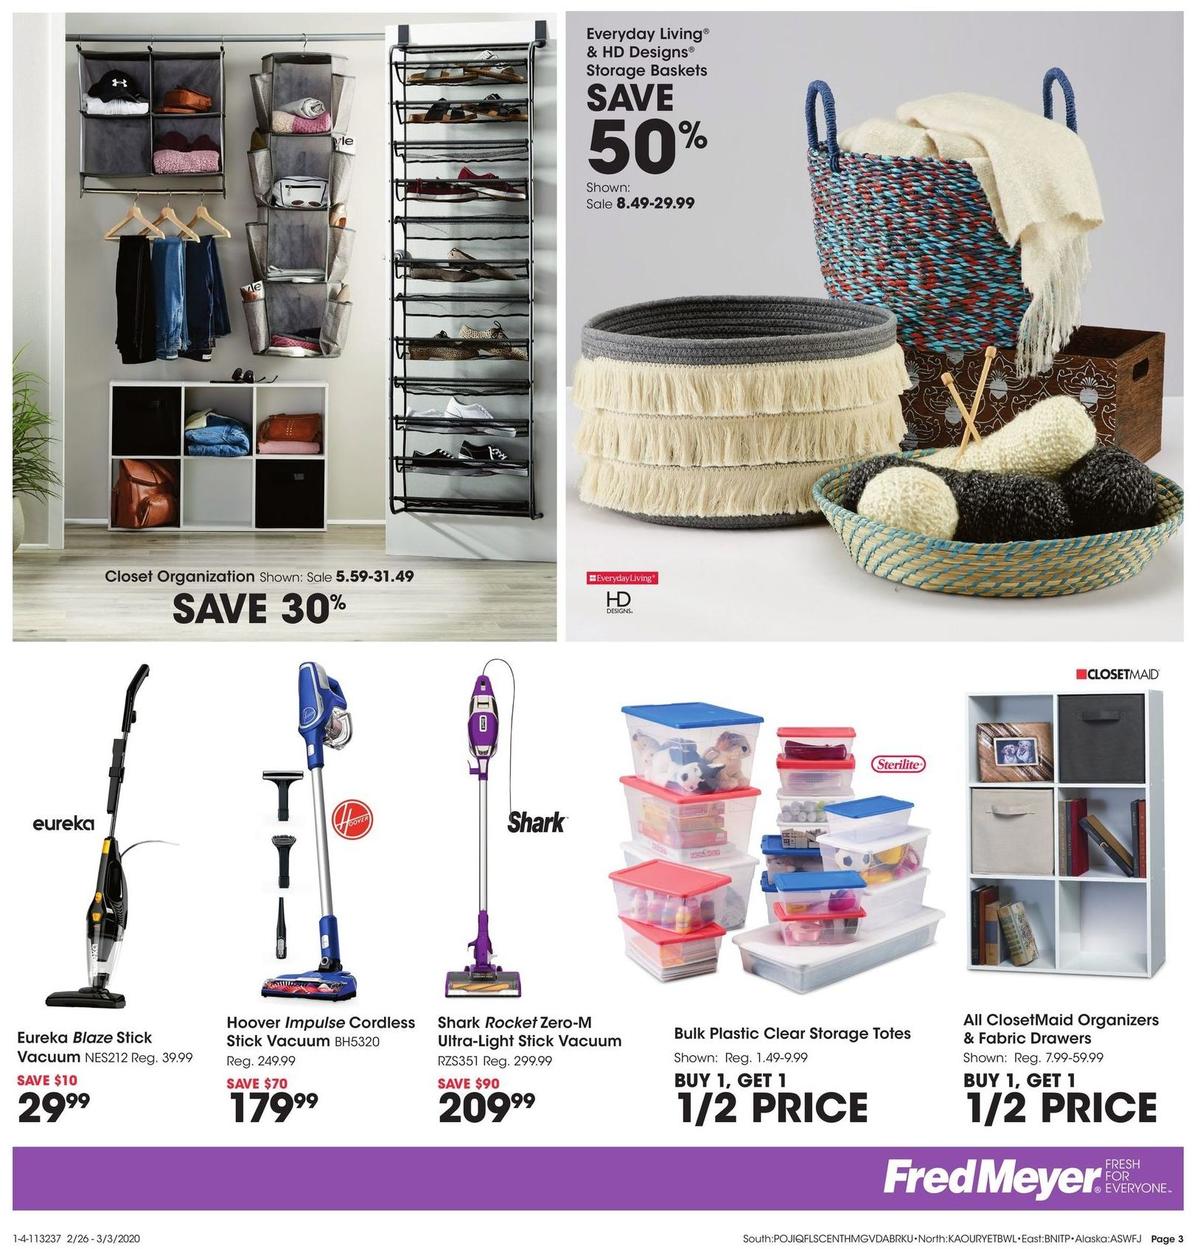 Fred Meyer General Merchandise Weekly Ad from February 26